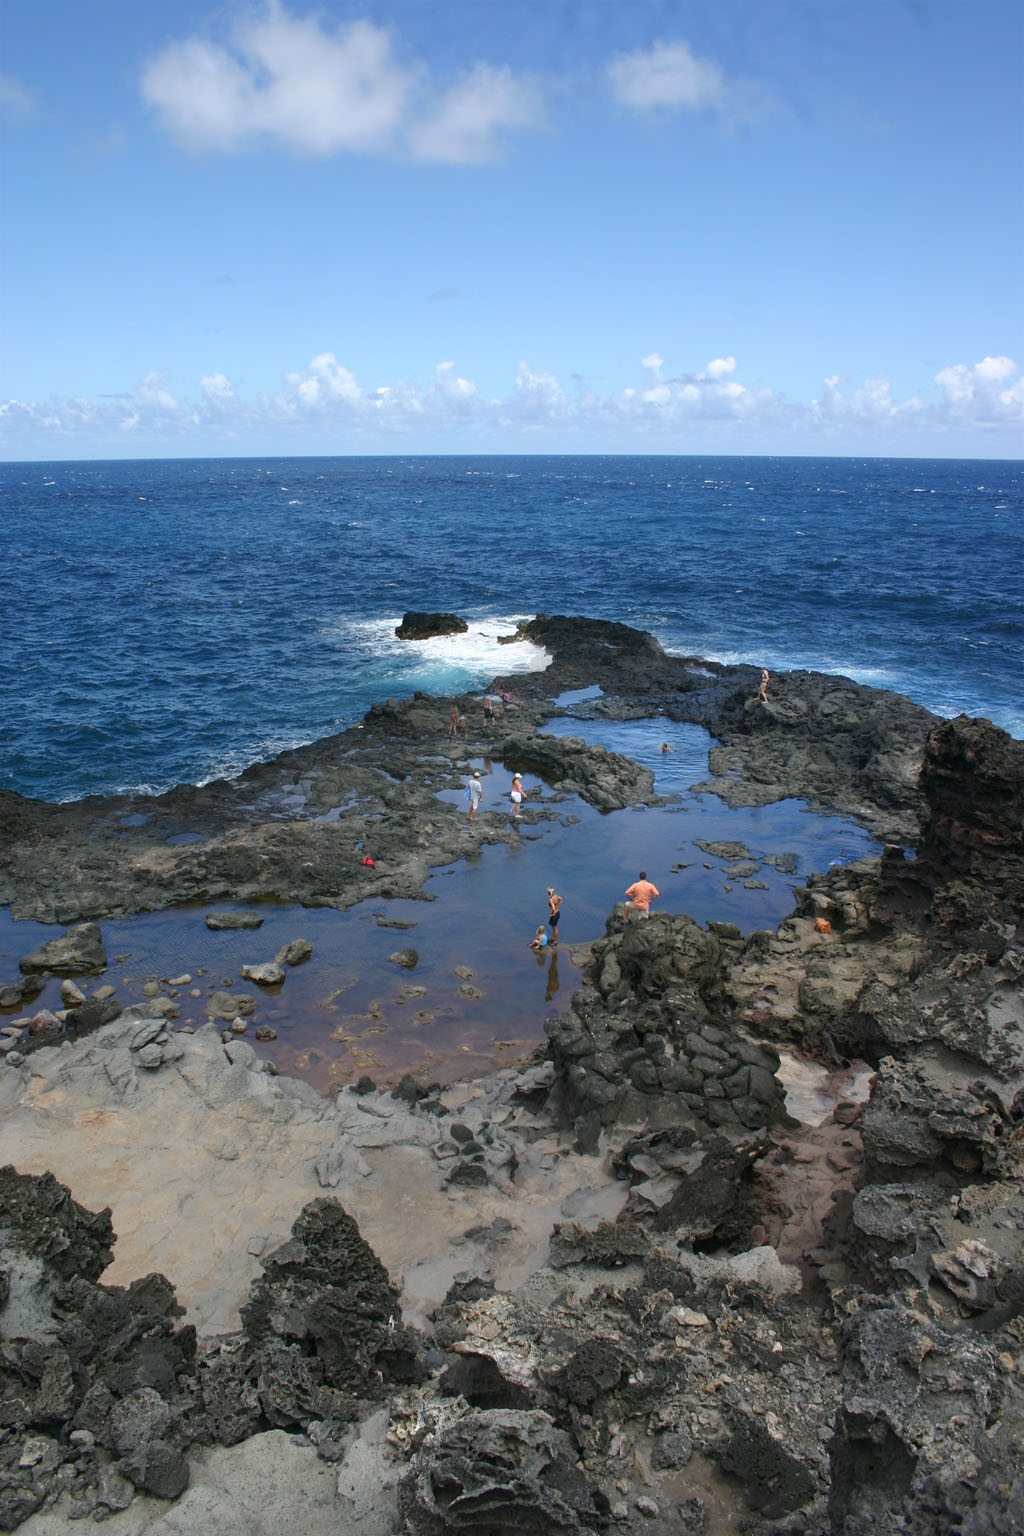 Olivine Pools later in the day